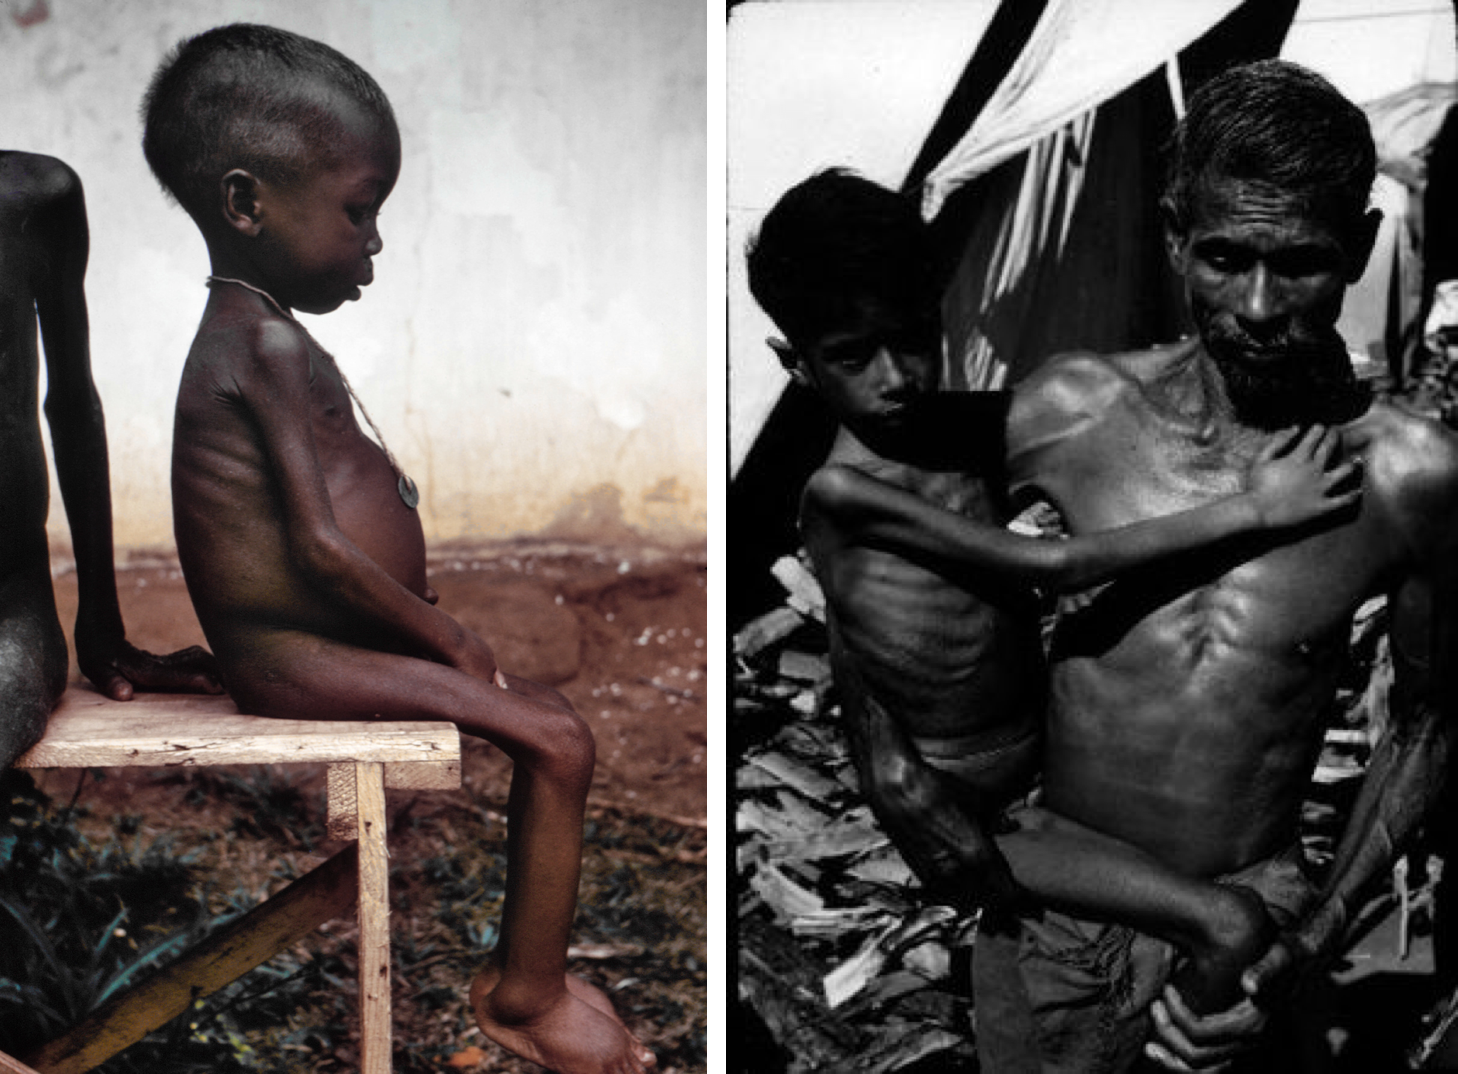 Two photos show children suffering from protein energy malnutrition. On the left is a child with kwashiorkor, showing the hallmark swollen belly. On the right is a child with marasmus, showing very thin limbs and visible ribs, no swollen belly.